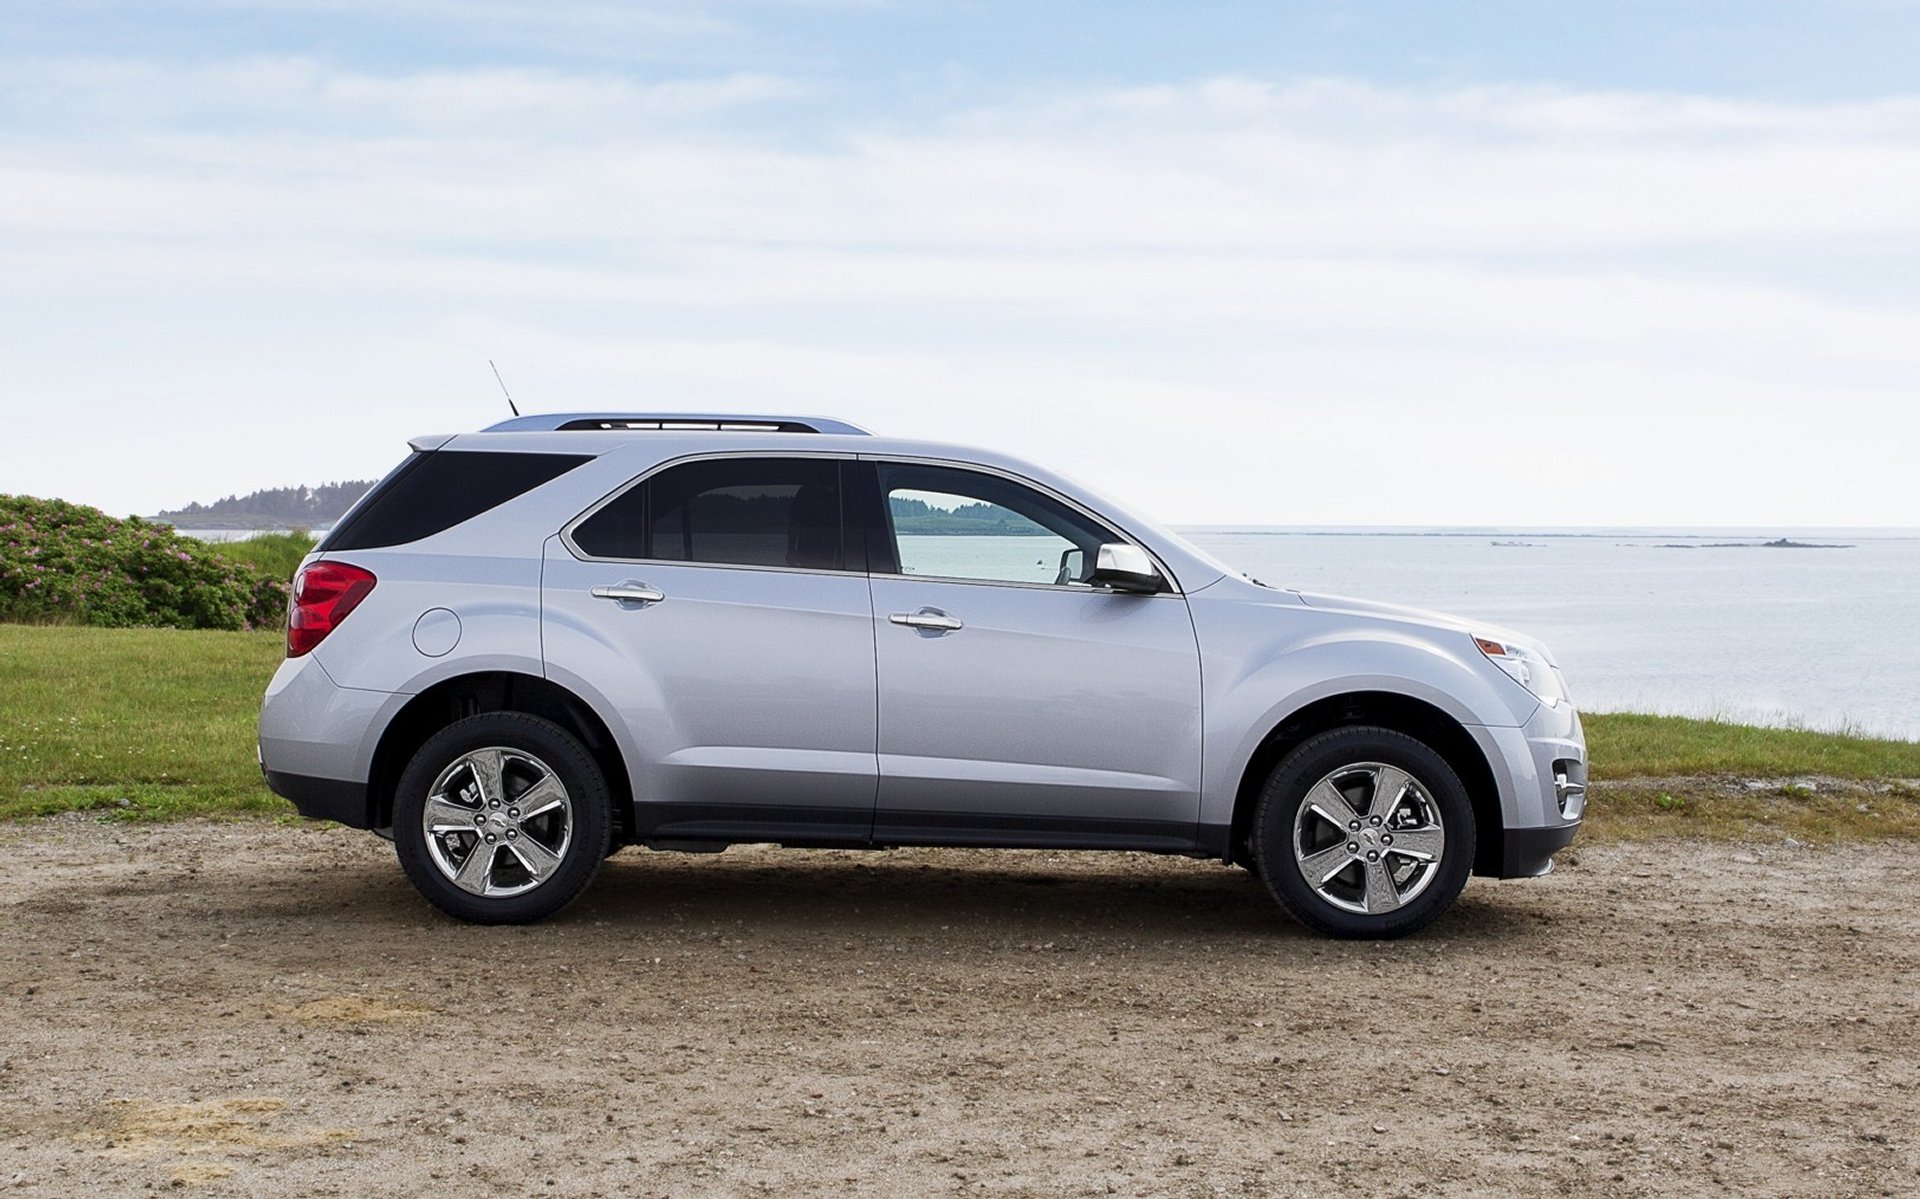 2015 Chevrolet Equinox (Chevy) Review, Ratings, Specs, Prices, and Photos -  The Car Connection